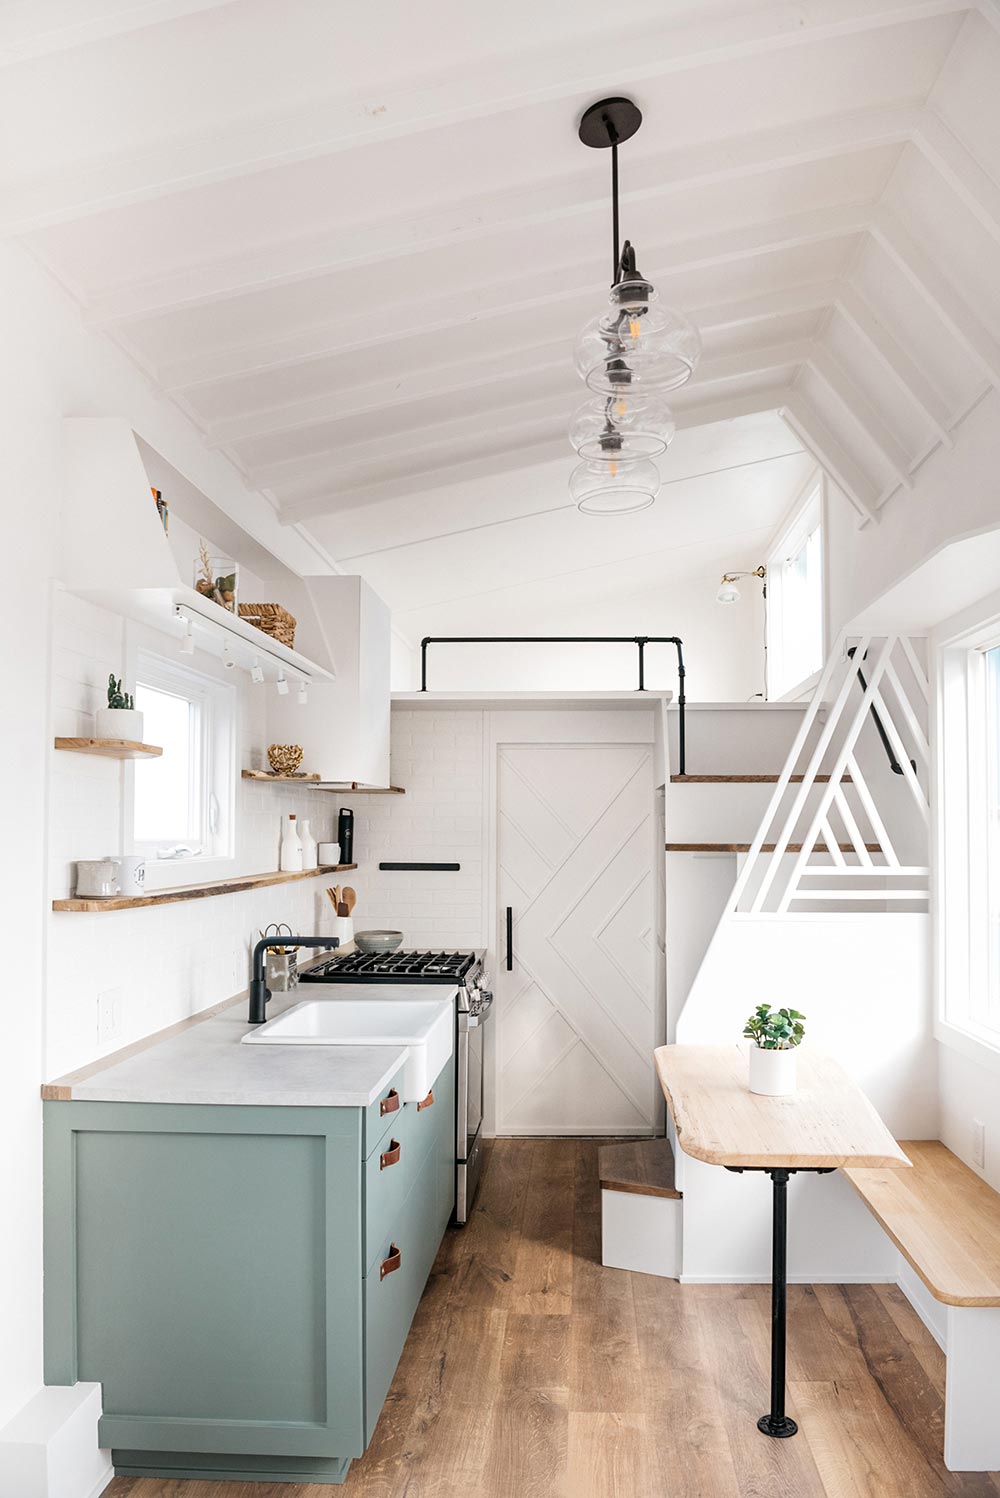 Living a minimalist life in tiny house